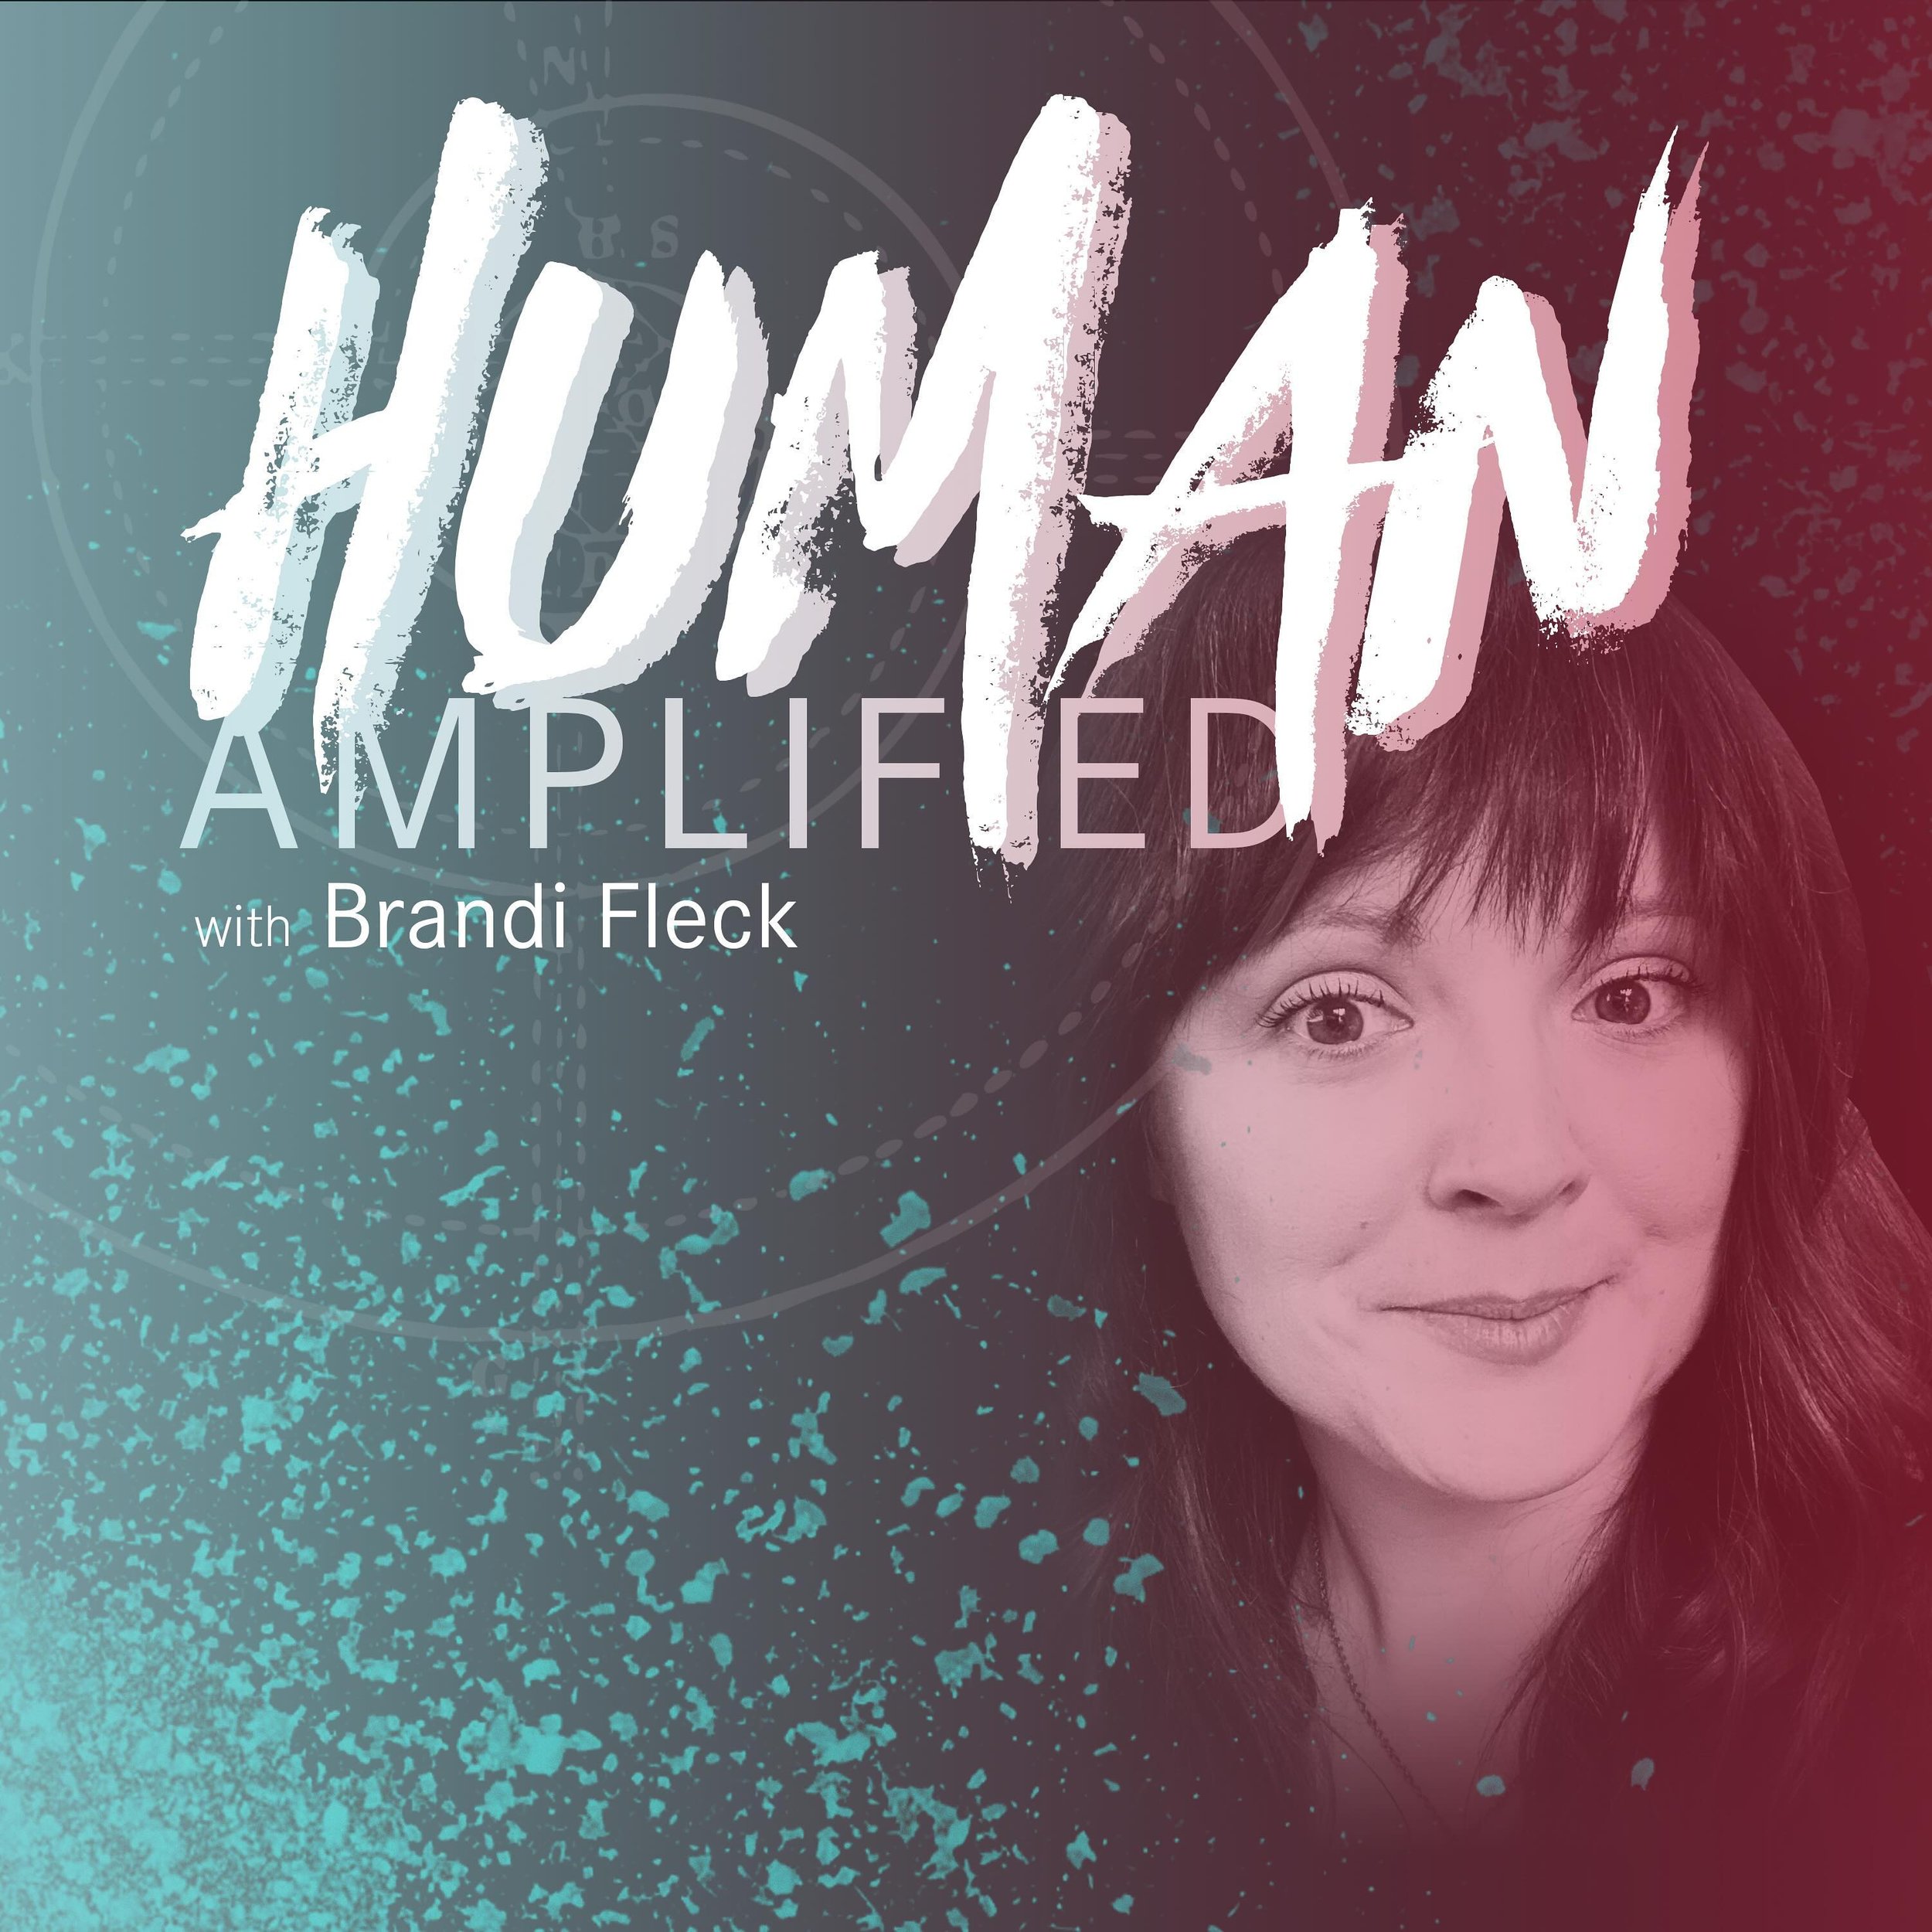 After two years, I feel a reboot coming on. Season 5 is in the works! #humanamplified #indiepodcast #paranormalstories #healing #innerwork #changingthenarrative